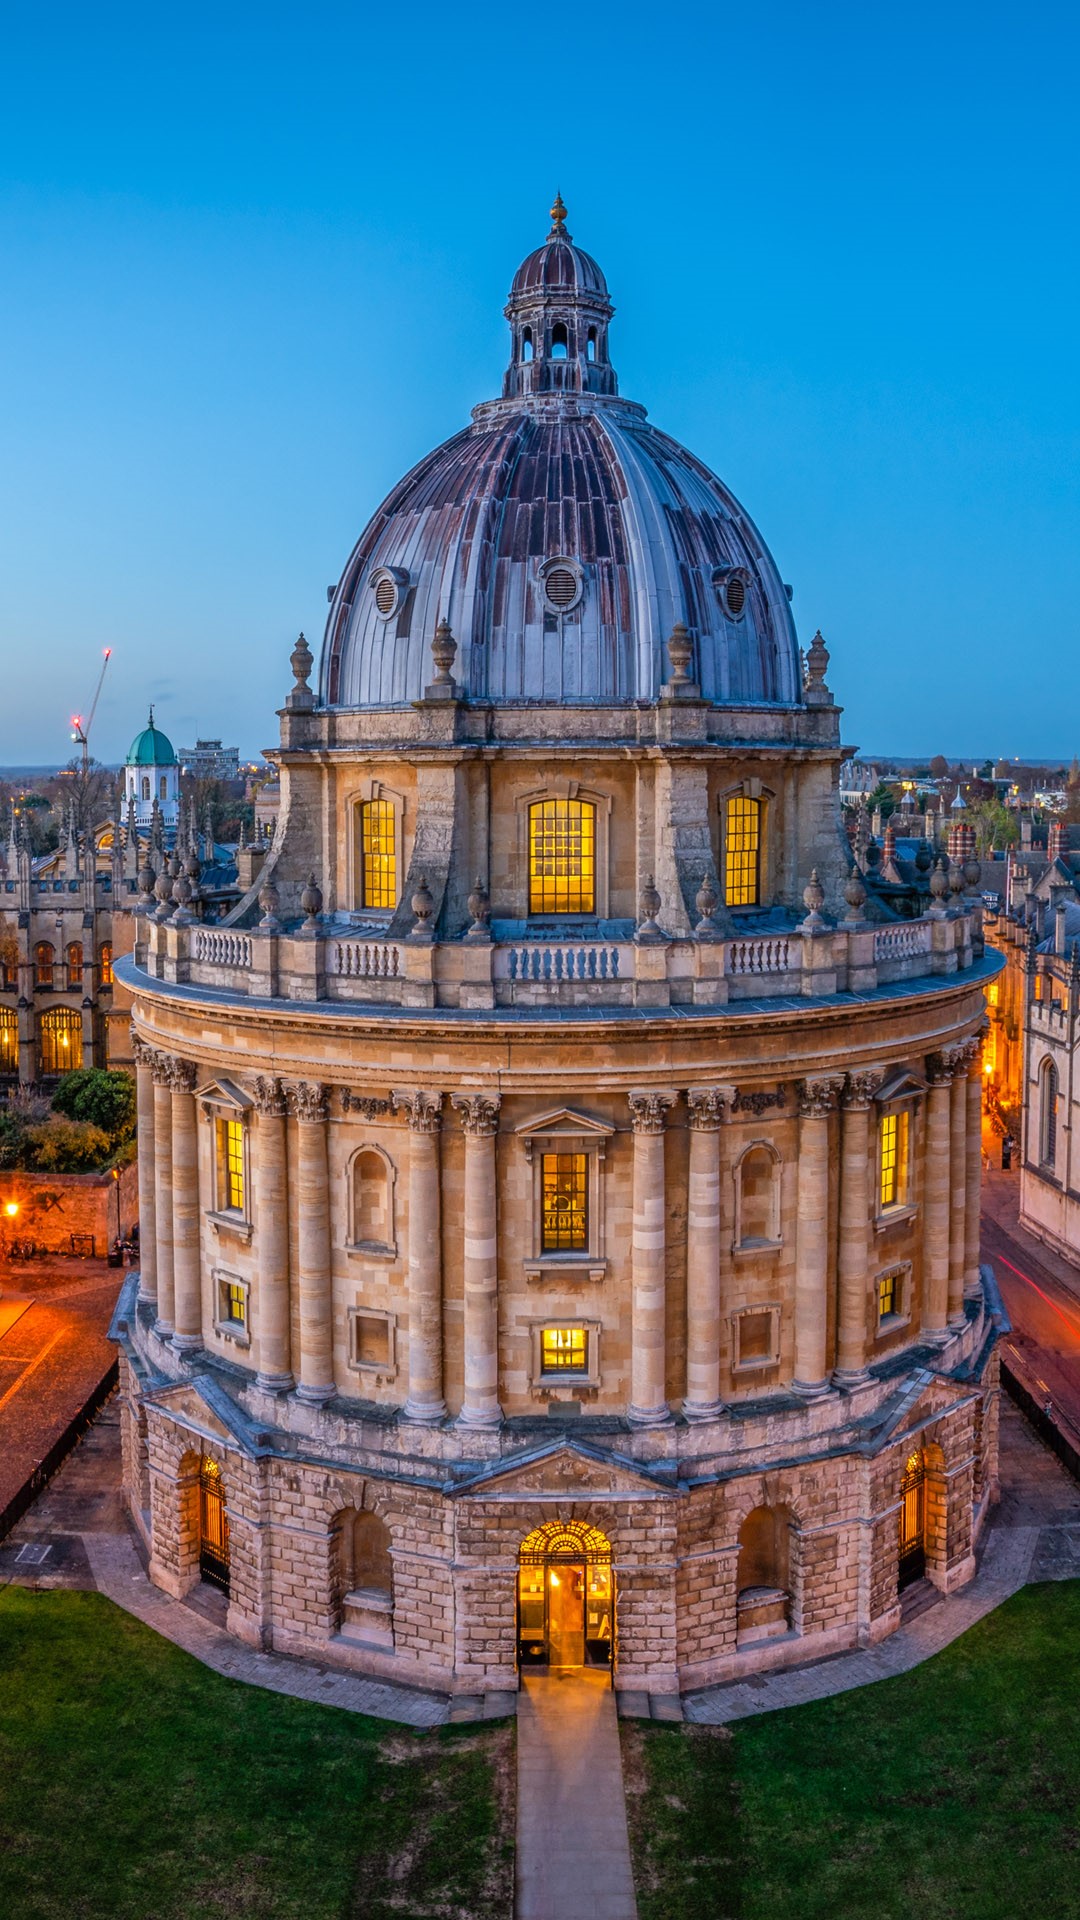 Evening view of Radcliffe Camera in Oxford University, England, UK |  Windows 10 Spotlight Images